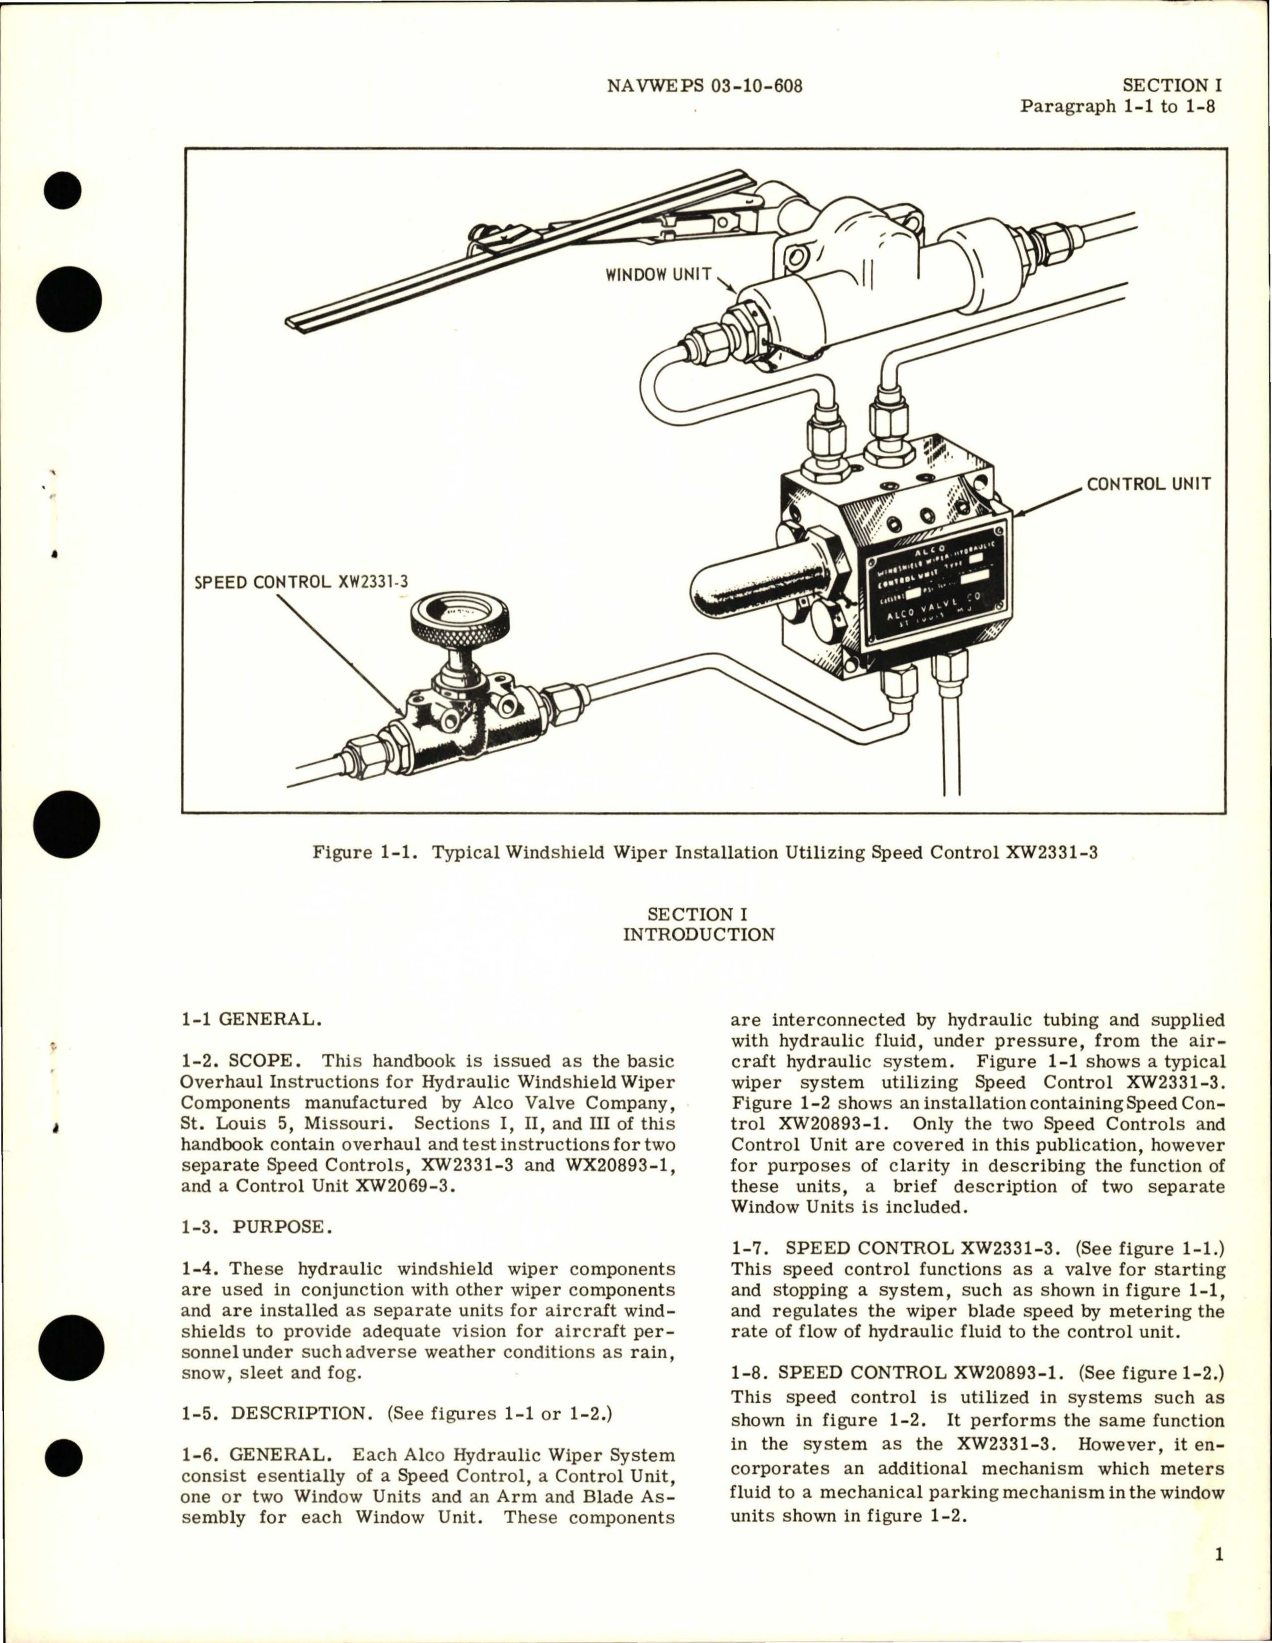 Sample page 5 from AirCorps Library document: Overhaul Instructions for Hydraulic Windshield Wiper System Components - Control Unit XW2069-3, Speed Control XW2331-3 and 20893-1